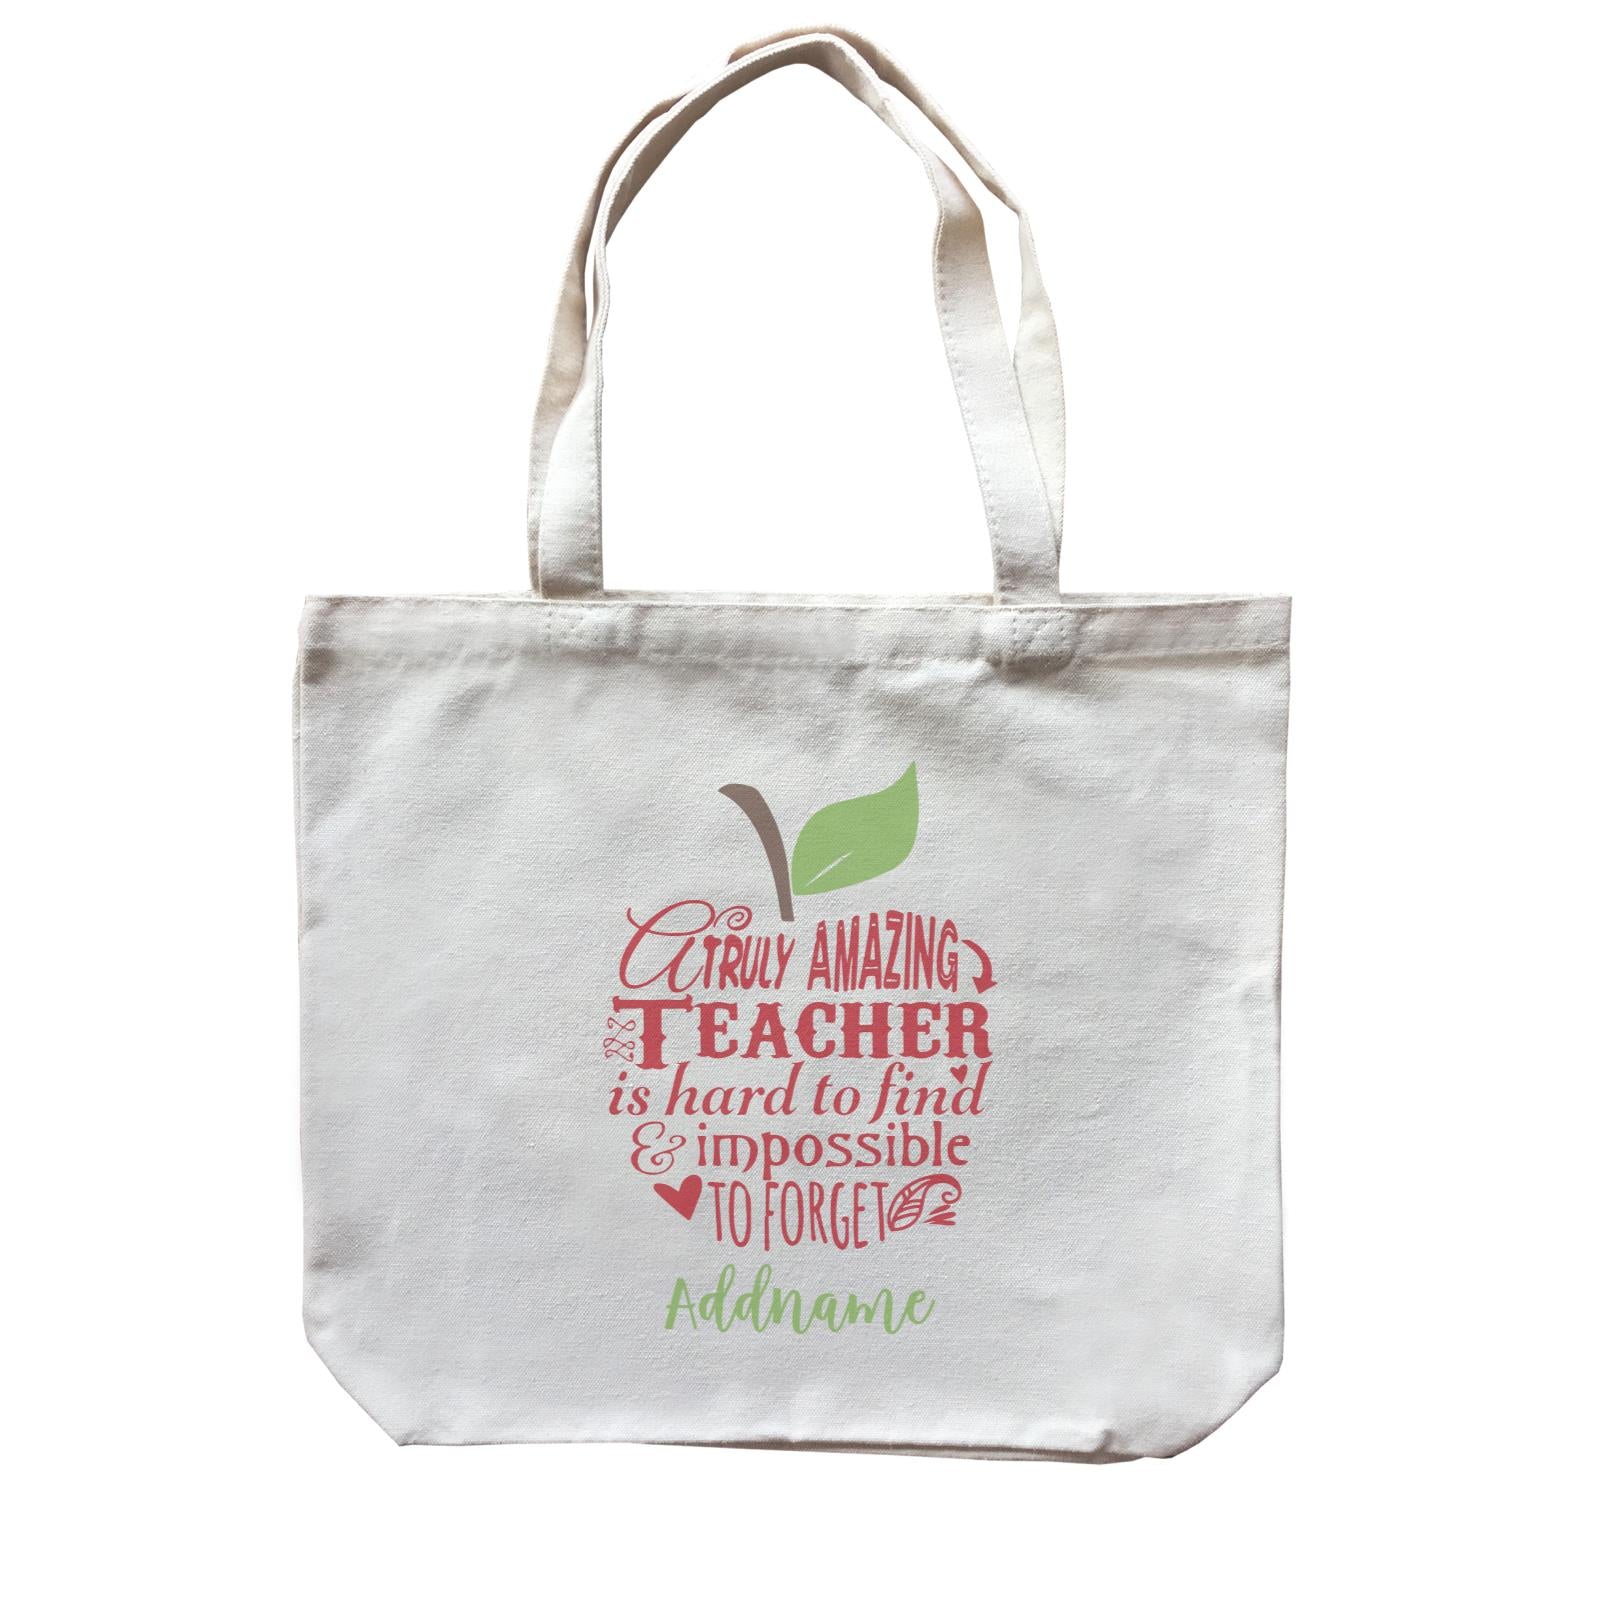 Teacher Apple Truly Amazing Teacher is Had To Find & Impossible To Forget Addname Canvas Bag